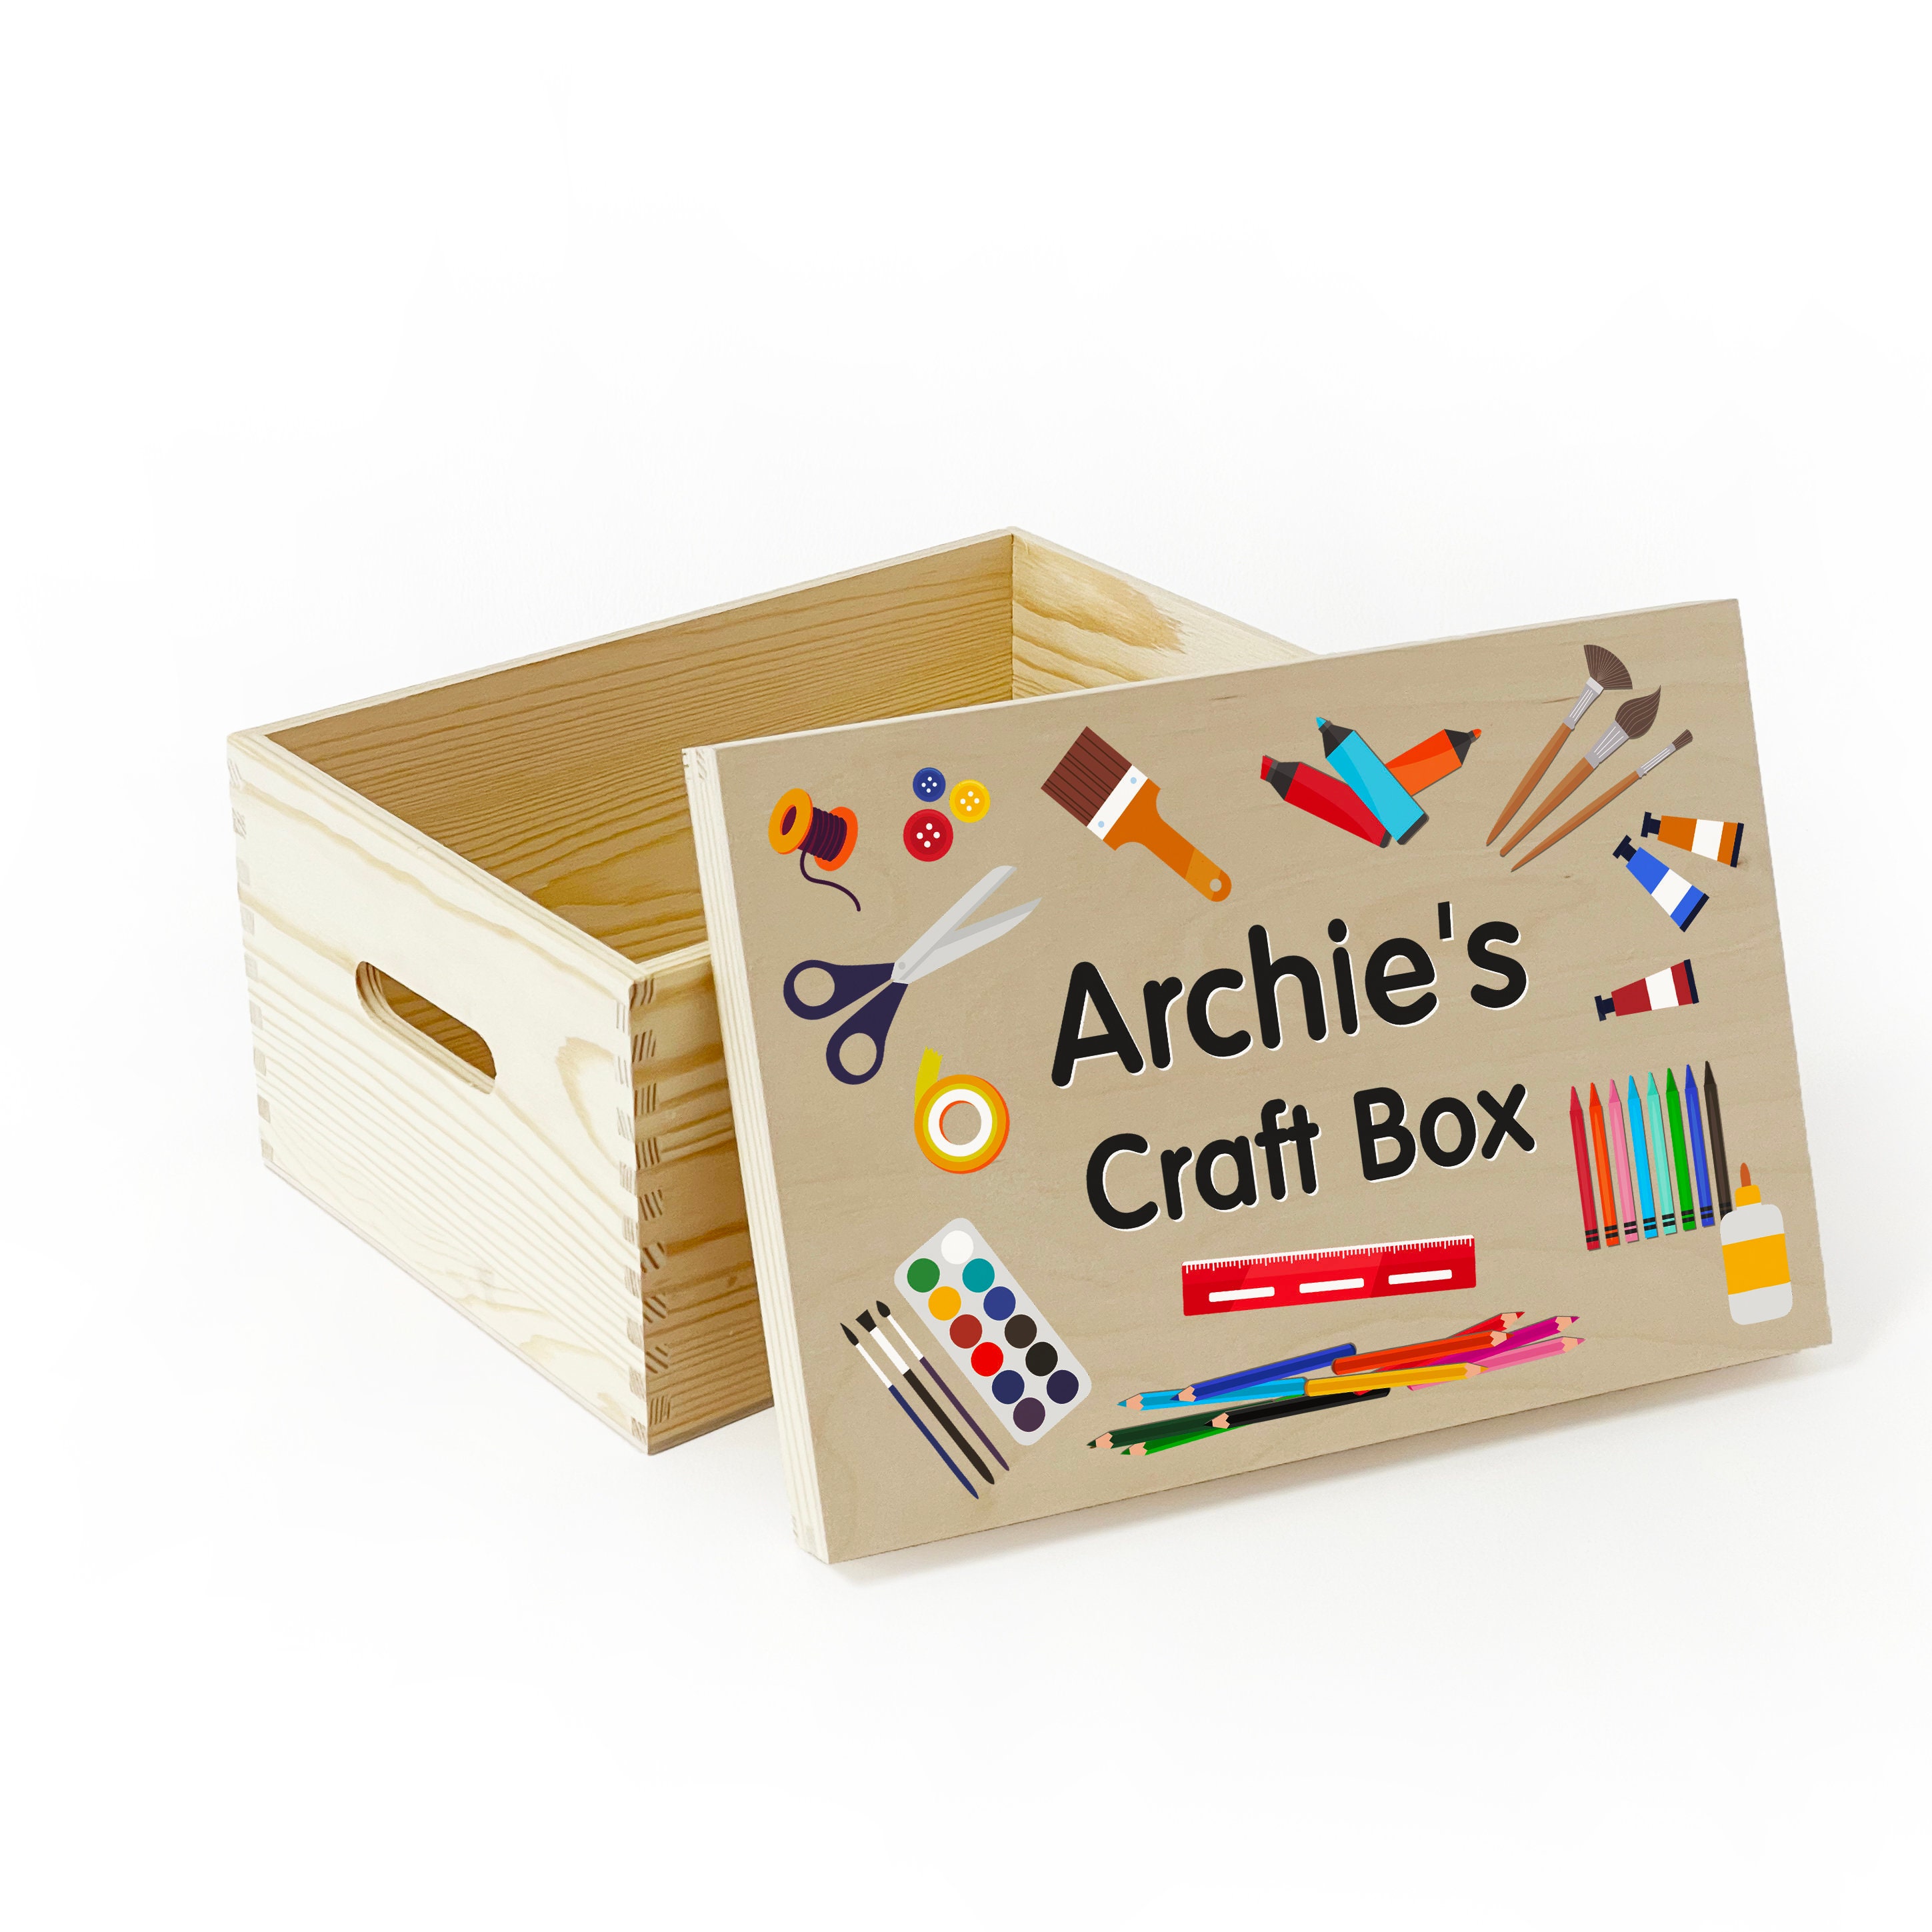 Personalised Wooden Arts & Crafts Box for Kids BOY GIRL Childrens